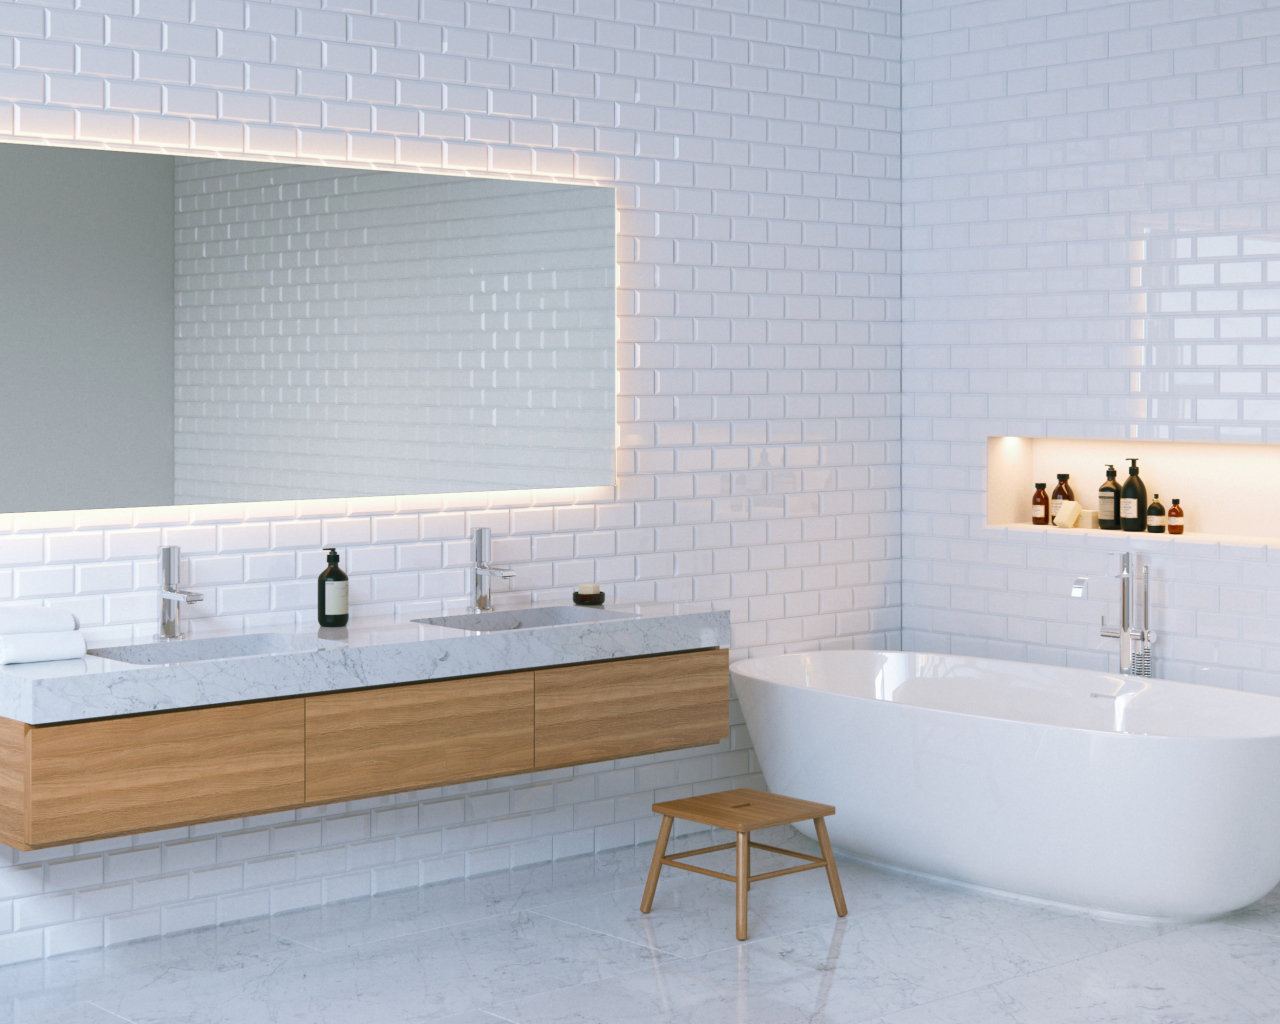 Bathroom with white walls and large mirror.